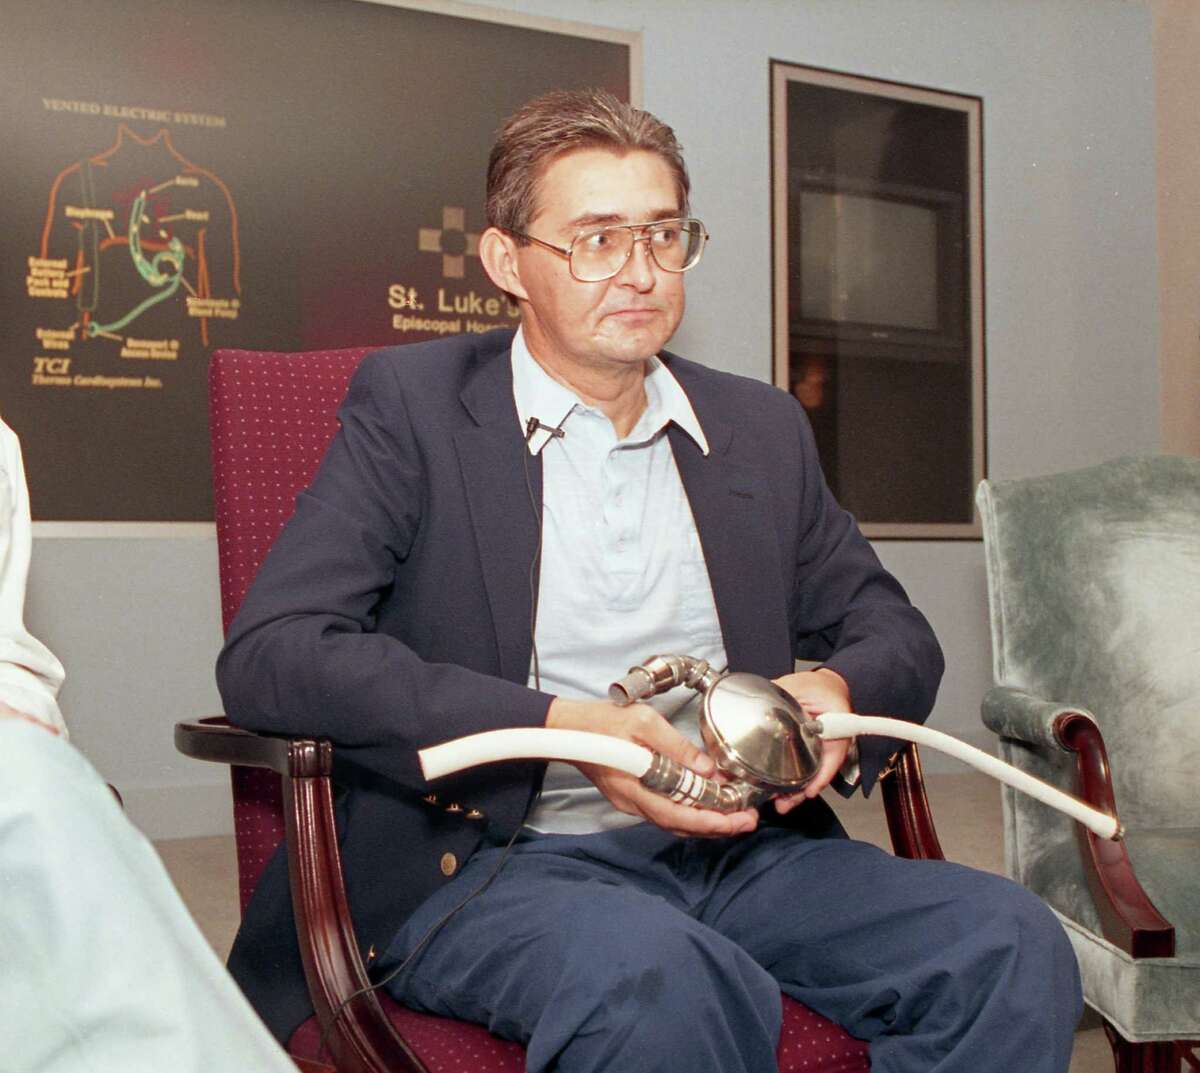 10/01/1991 - Heart patient Mike Templeton shows the ventricular assist device that was implanted in his body 28 days ago. Templeton is only the second recipient of the portable, battery-assisted pump and is the first one who appears to have regained anything close to normal mobility. The first patient was Larry Heinsohn, who died two weeks after his implantation on May 9.